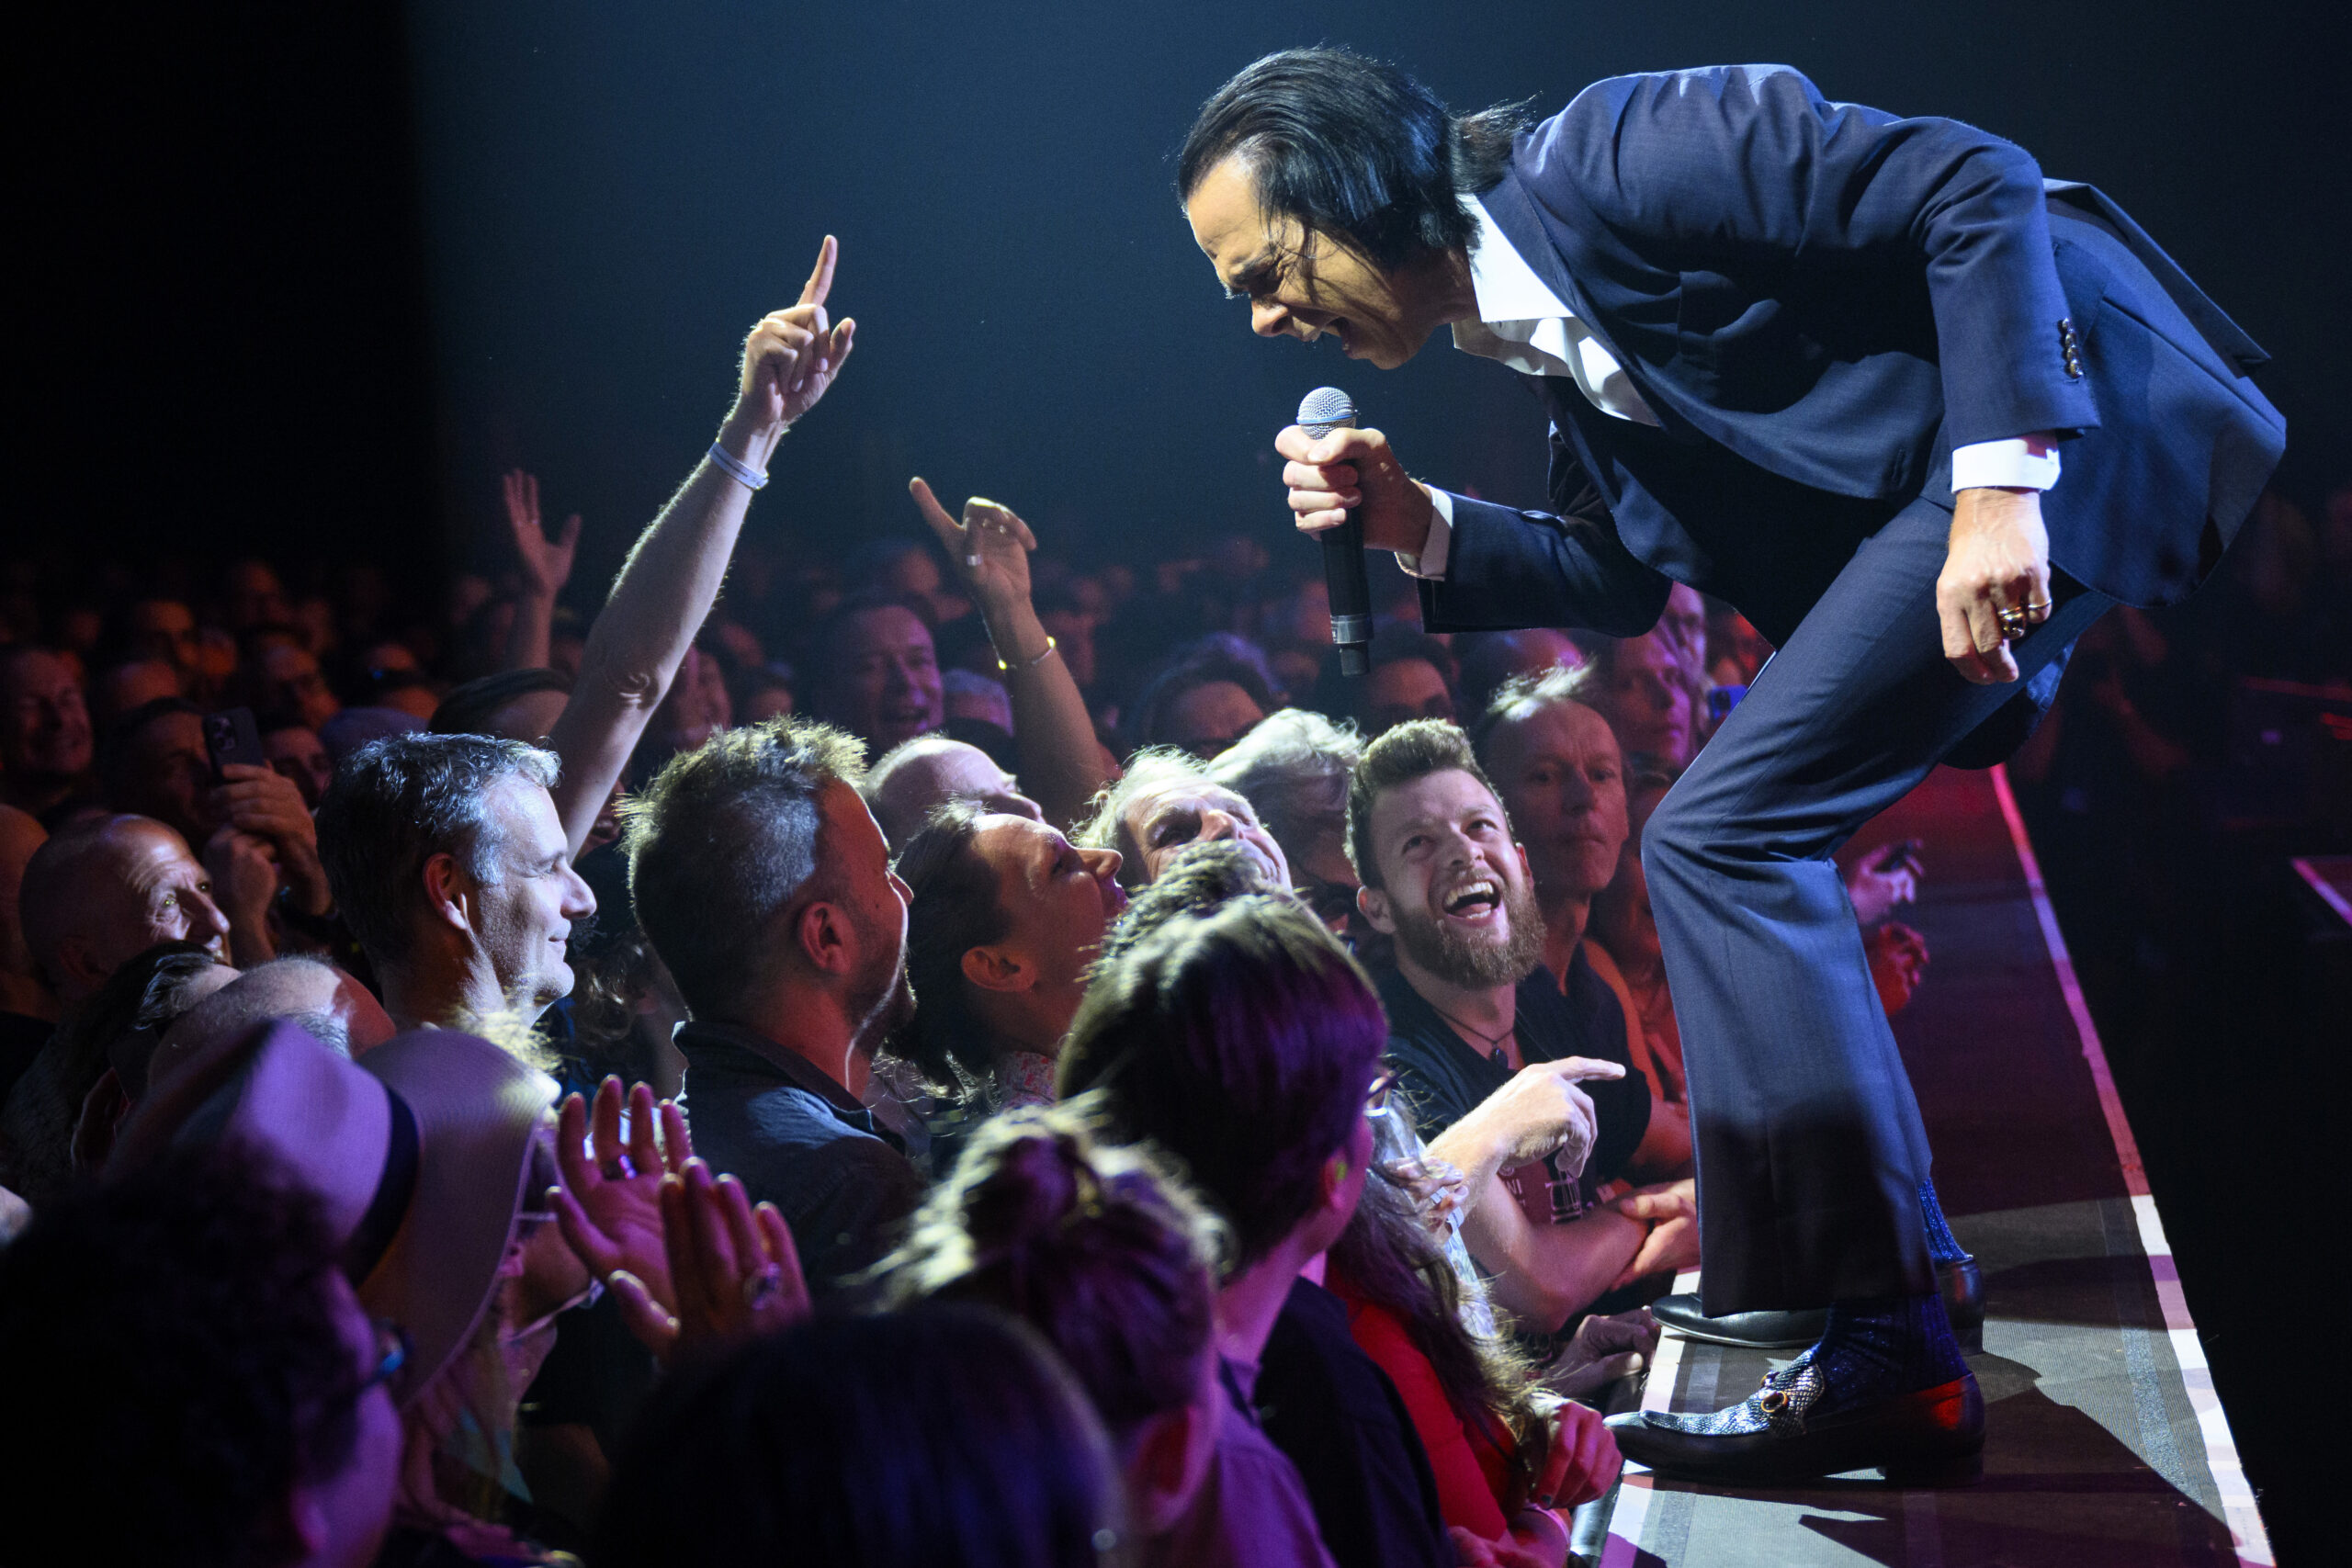 Australian singer-songwriter Nick Cave and The Bad Seeds perform on the Auditorium Stravinski stage during the 56th Montreux Jazz Festival (MJF), in Montreux, Switzerland, Saturday, July 2, 2022. The festival runs from 01 to 16 July and features 500 concerts. (Laurent Gillieron/Keystone via AP)